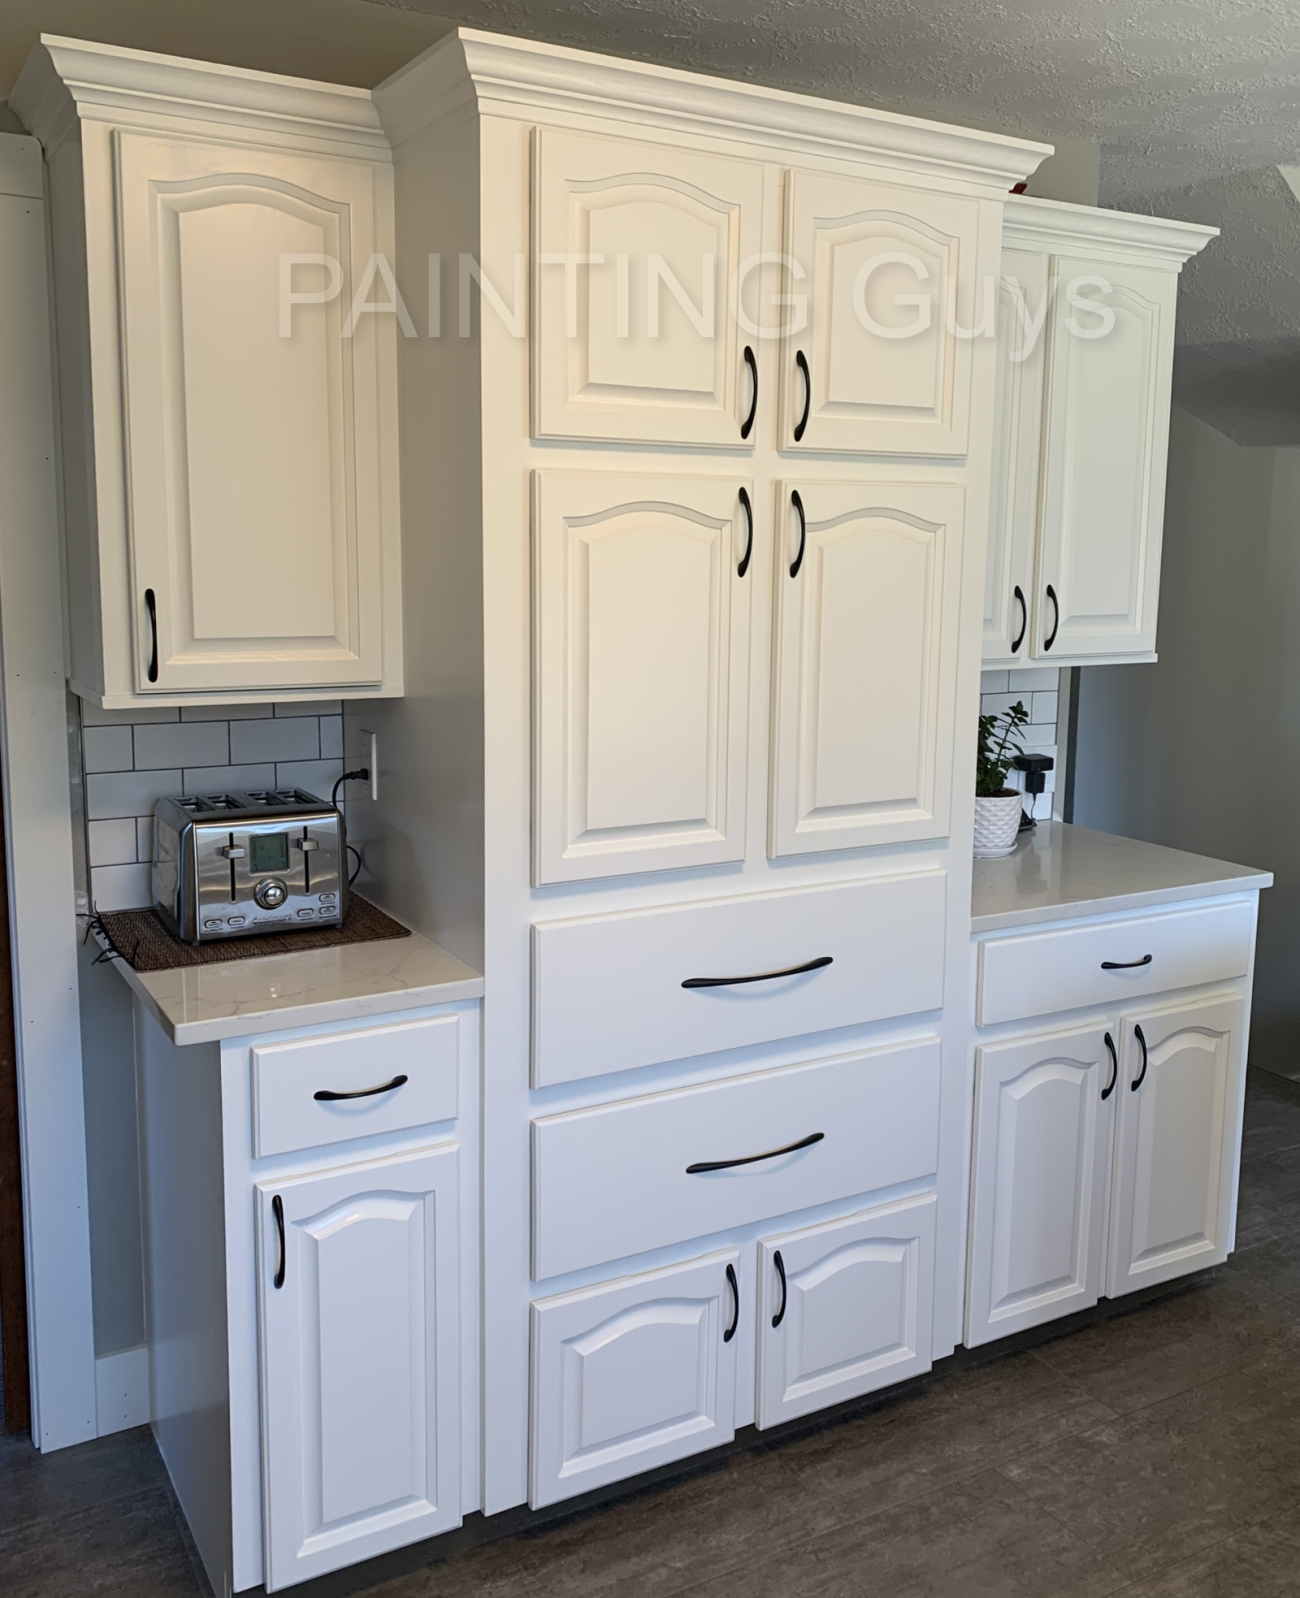 Cost to paint kitchen cabinets